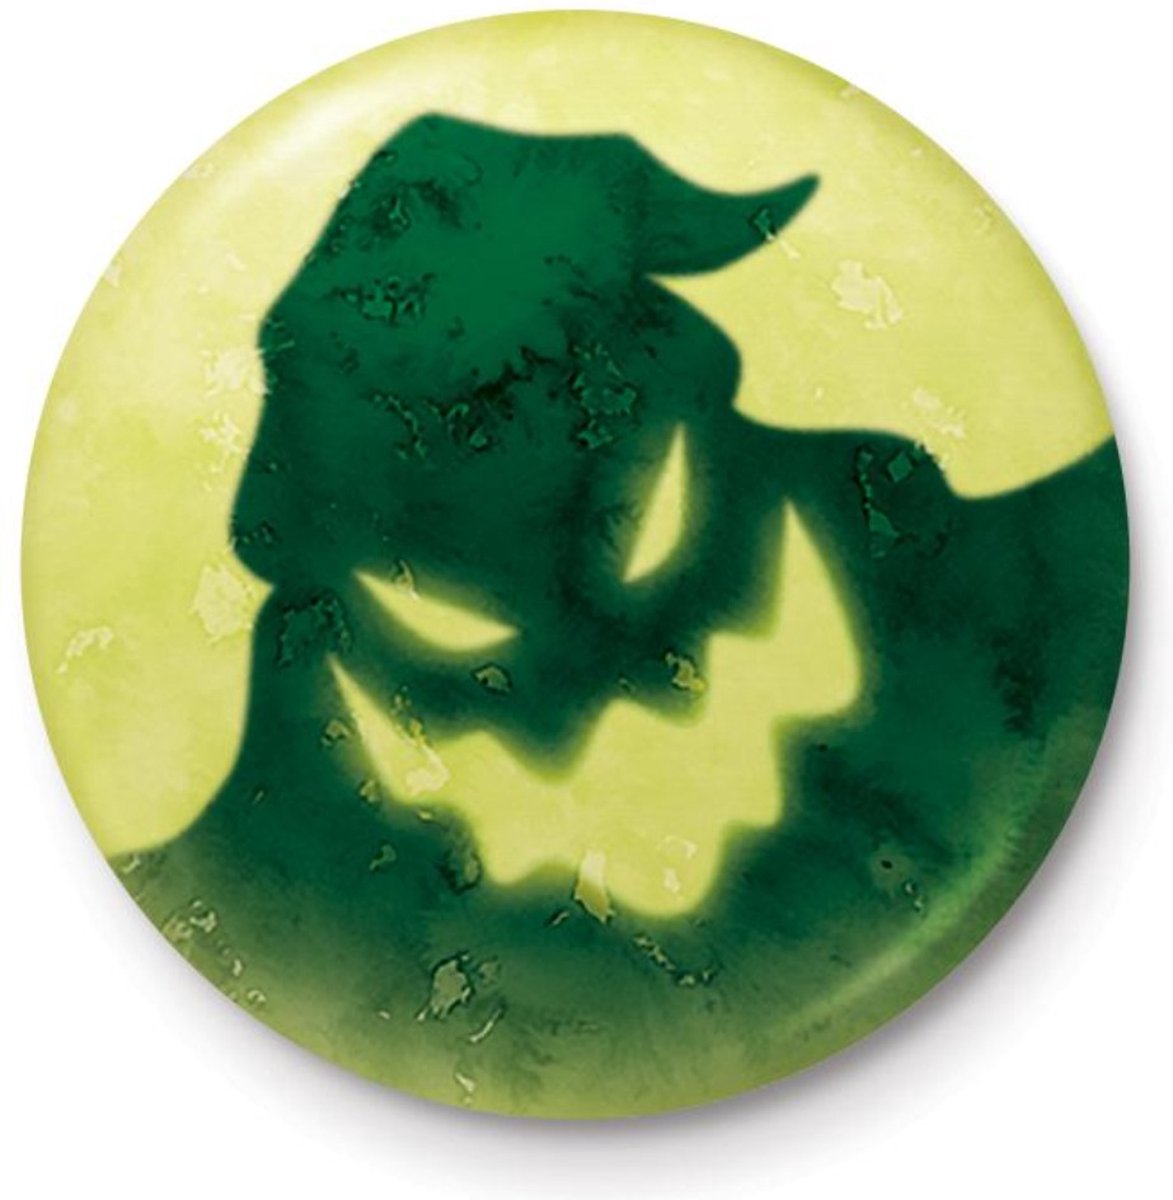 Pyramid Int - Nightmare before Christmas - Oogie Boogie Button Badge